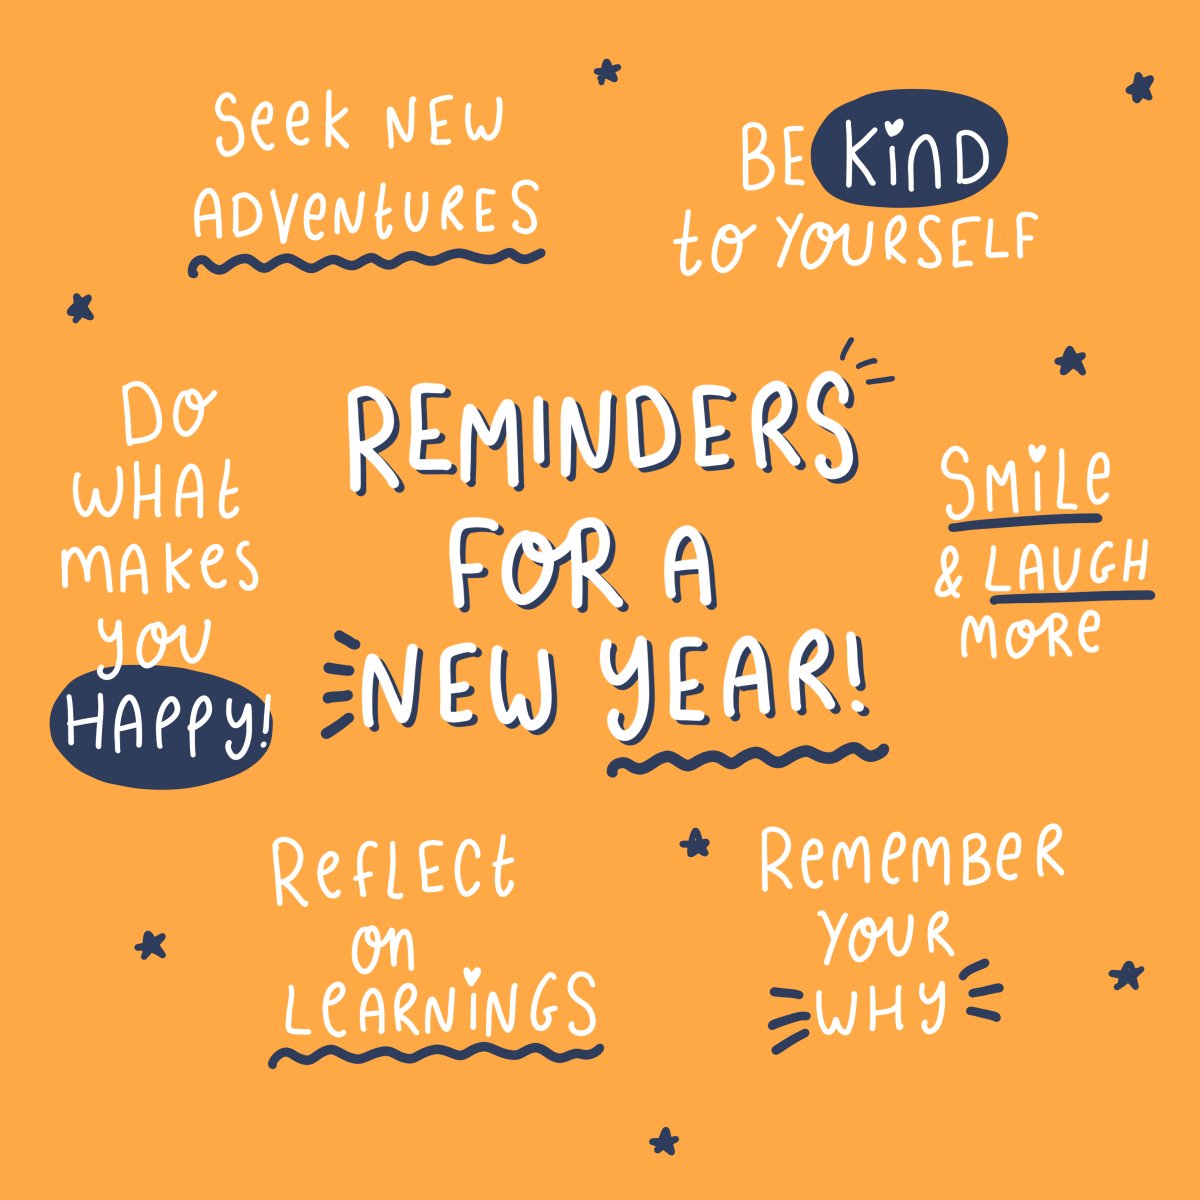 As you set your intentions for the year ahead, keep these reminders in mind 🧡